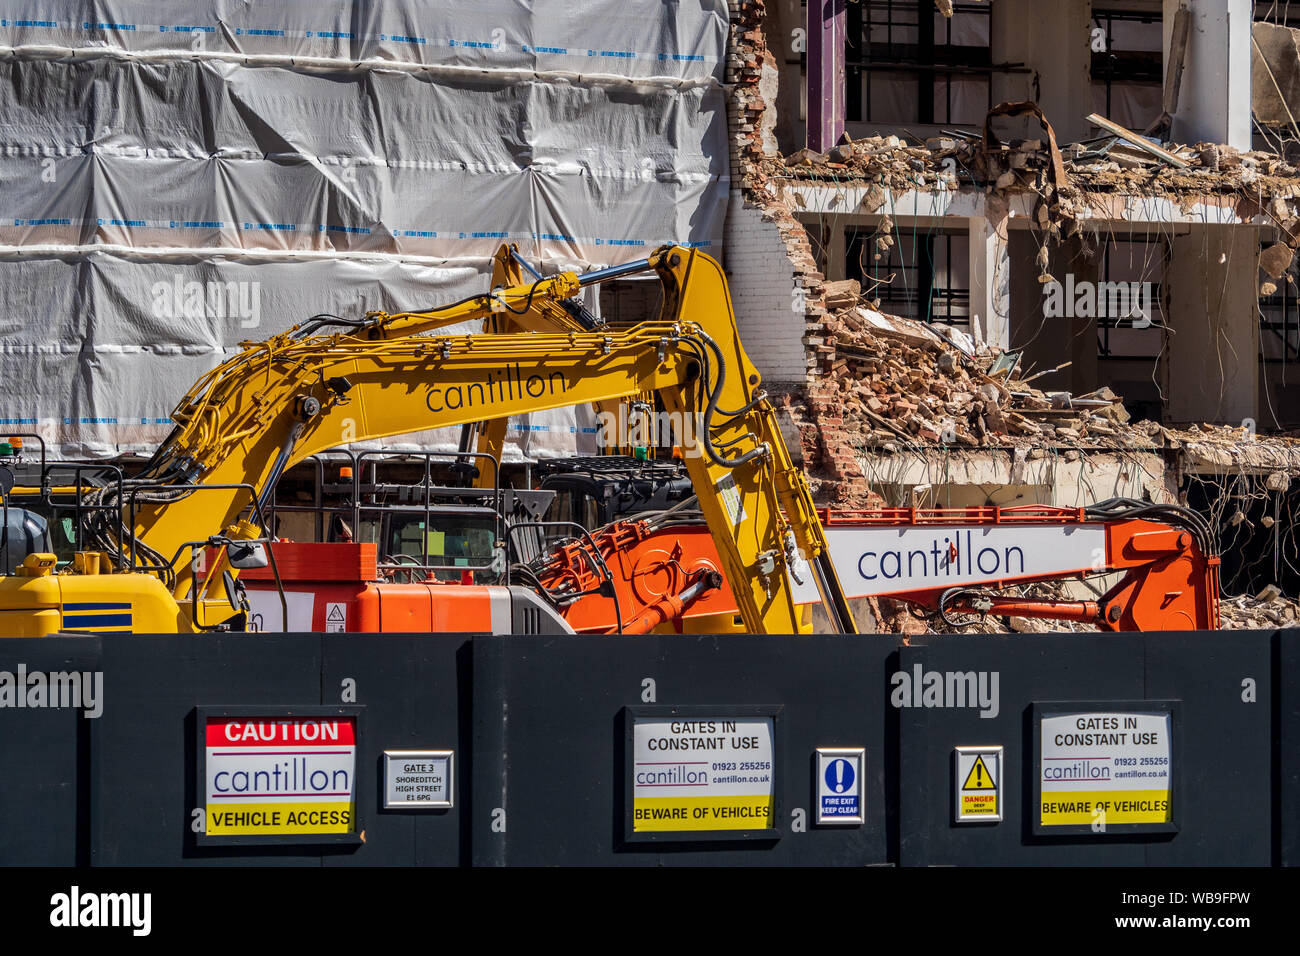 Cantillon - Cantillon Ltd is a London based demolition company - sign outside construction site during the demolition phase. Stock Photo